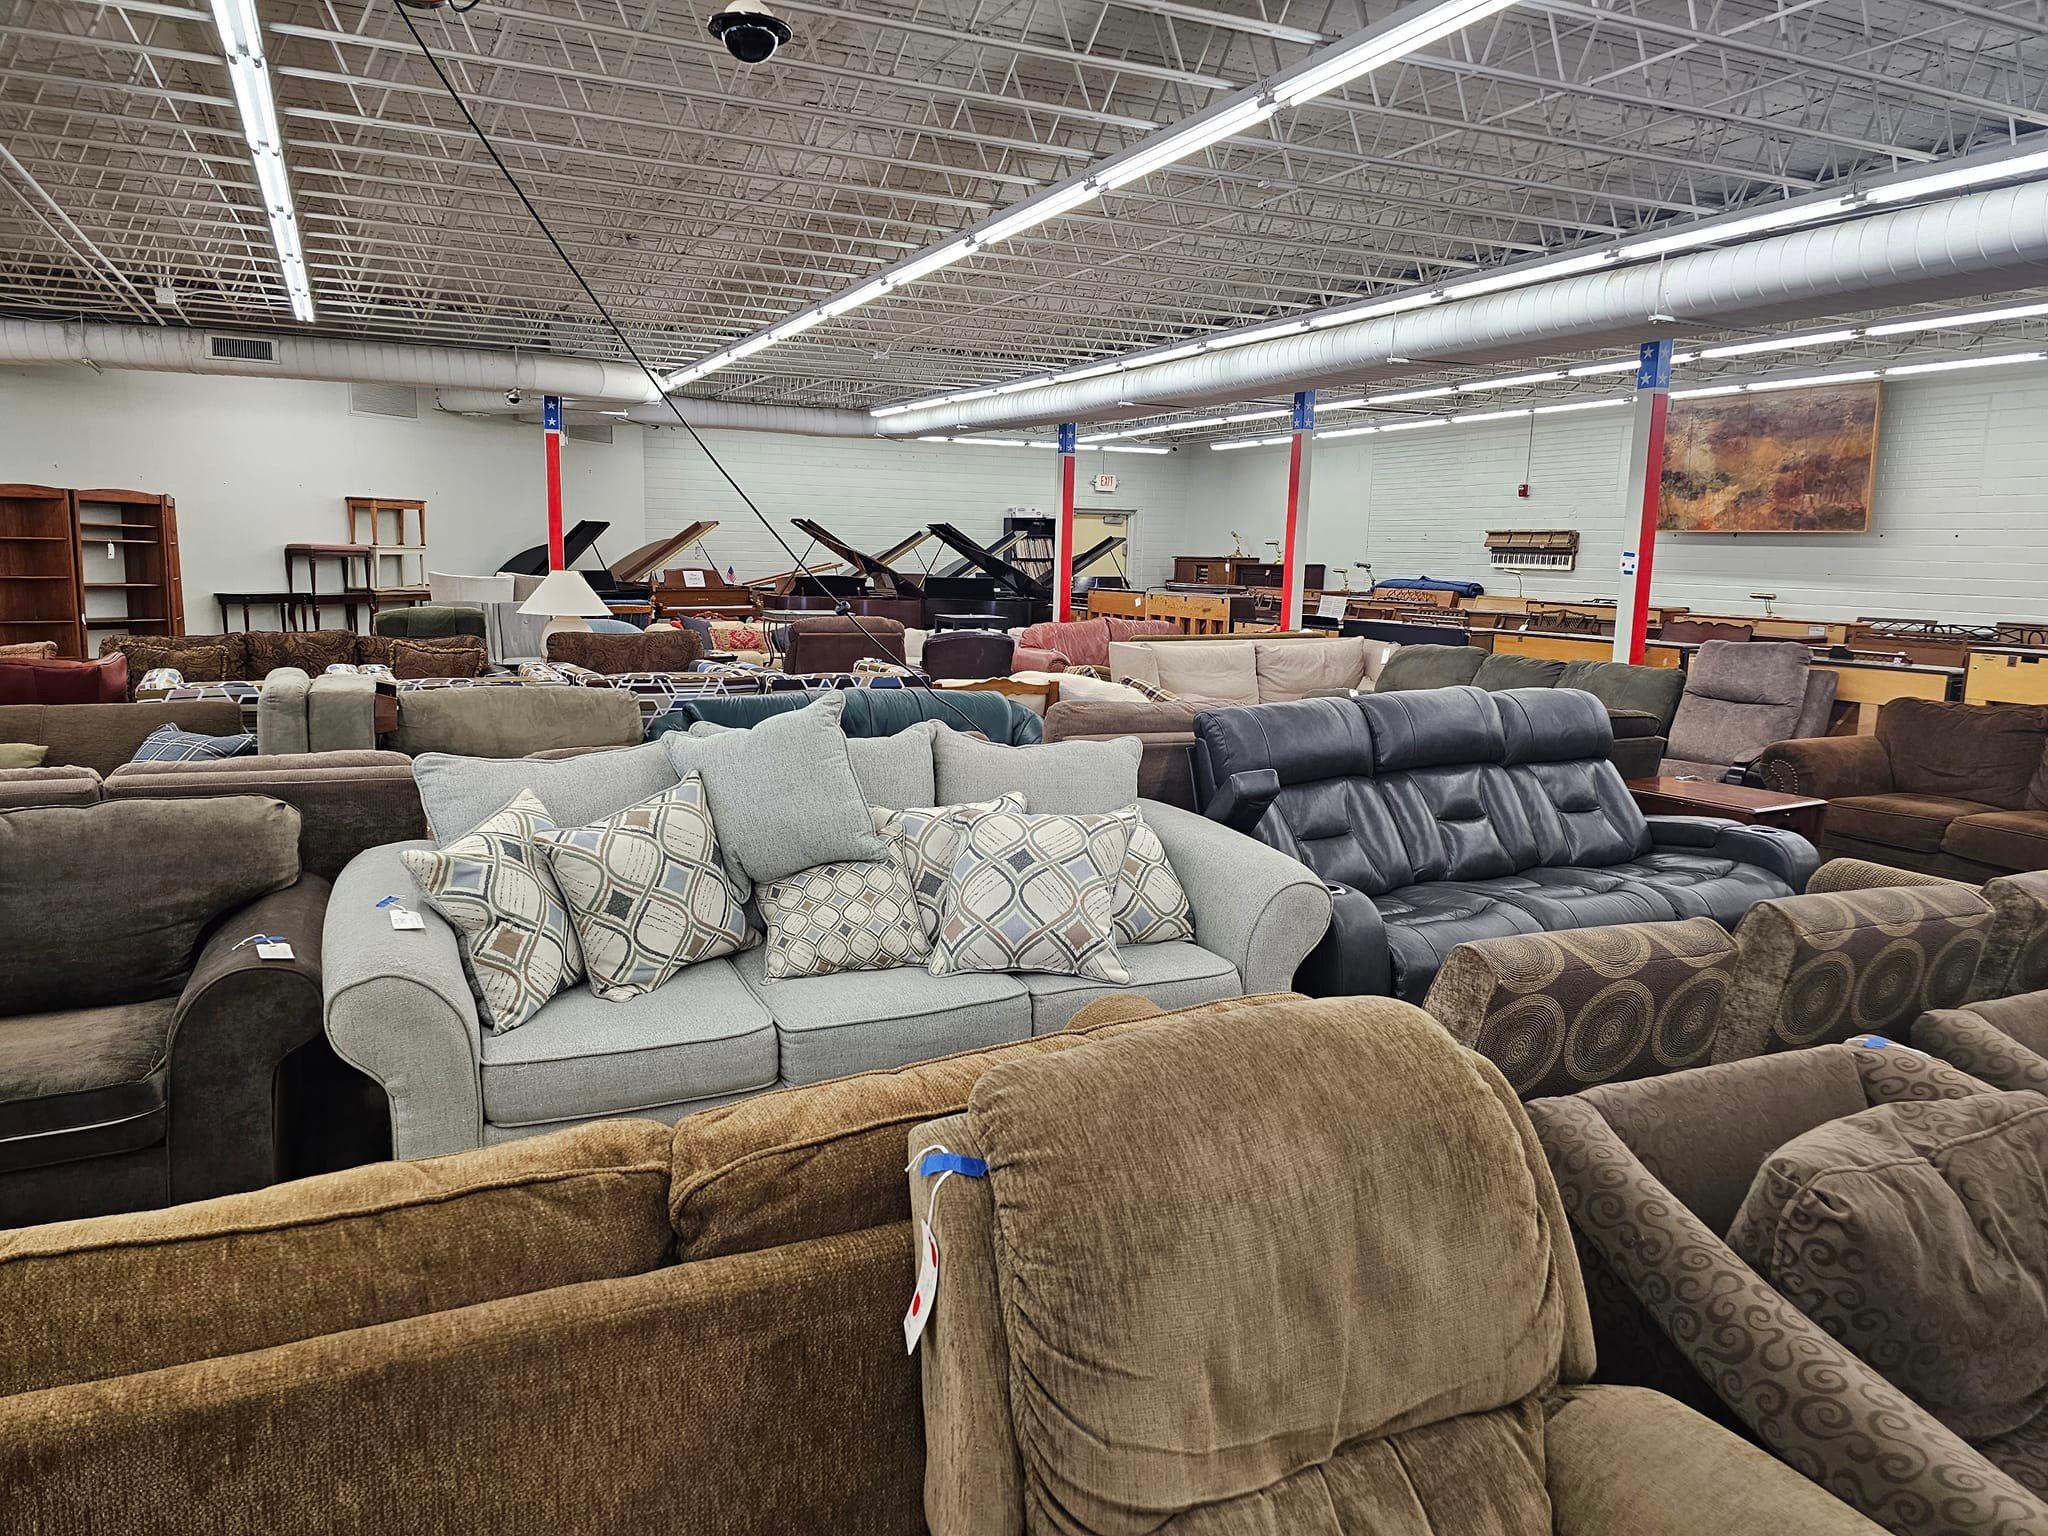 Used Couches for Sale